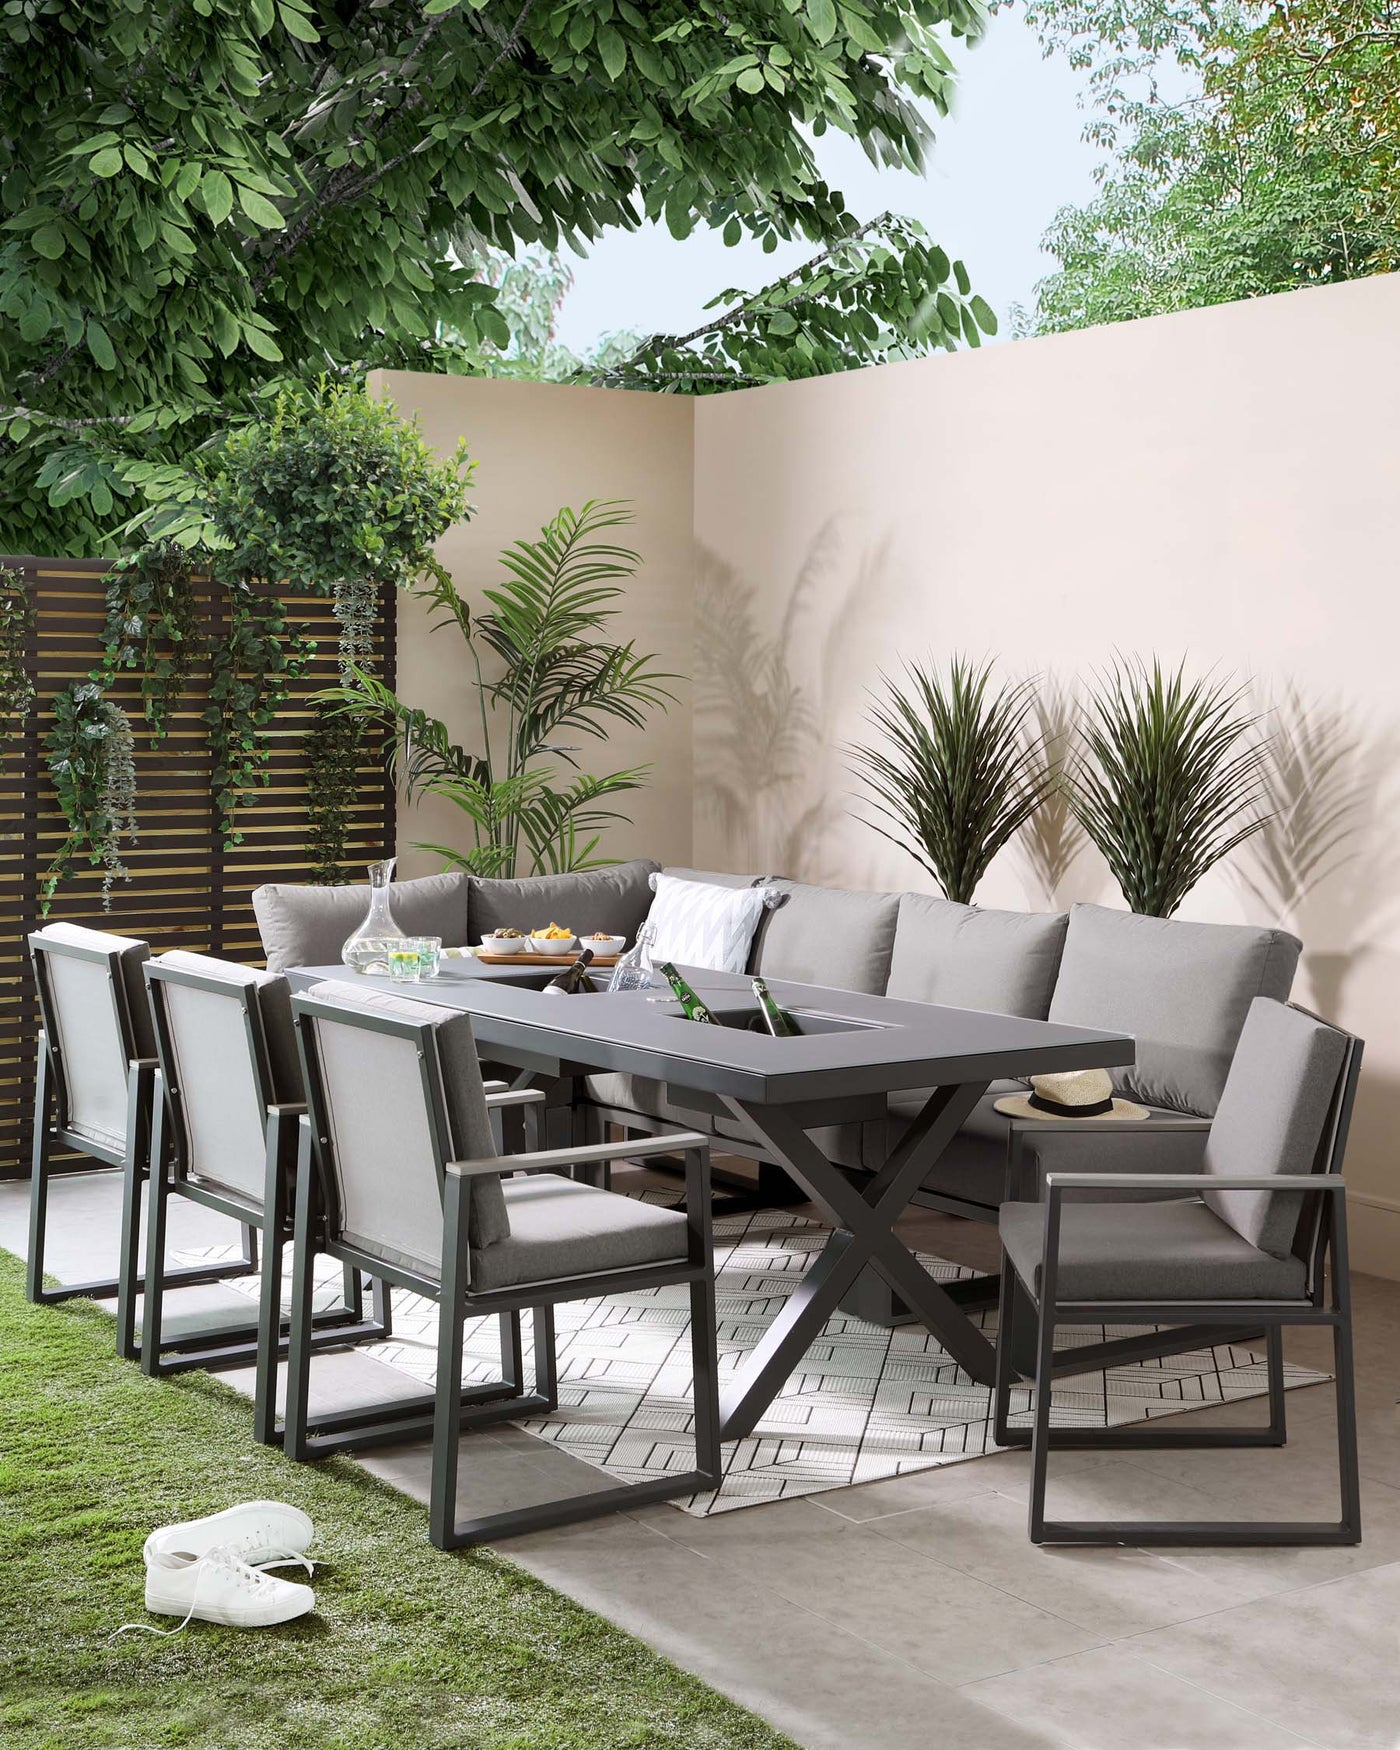 Modern outdoor furniture set featuring a sleek rectangular dining table with a matte dark finish and distinctive X-shaped legs, accompanied by six matching chairs with clean lines, durable fabric seats and backrests, all supported by a robust metal frame. The set is complemented by soft grey cushions, creating a stylish and comfortable al fresco dining experience.